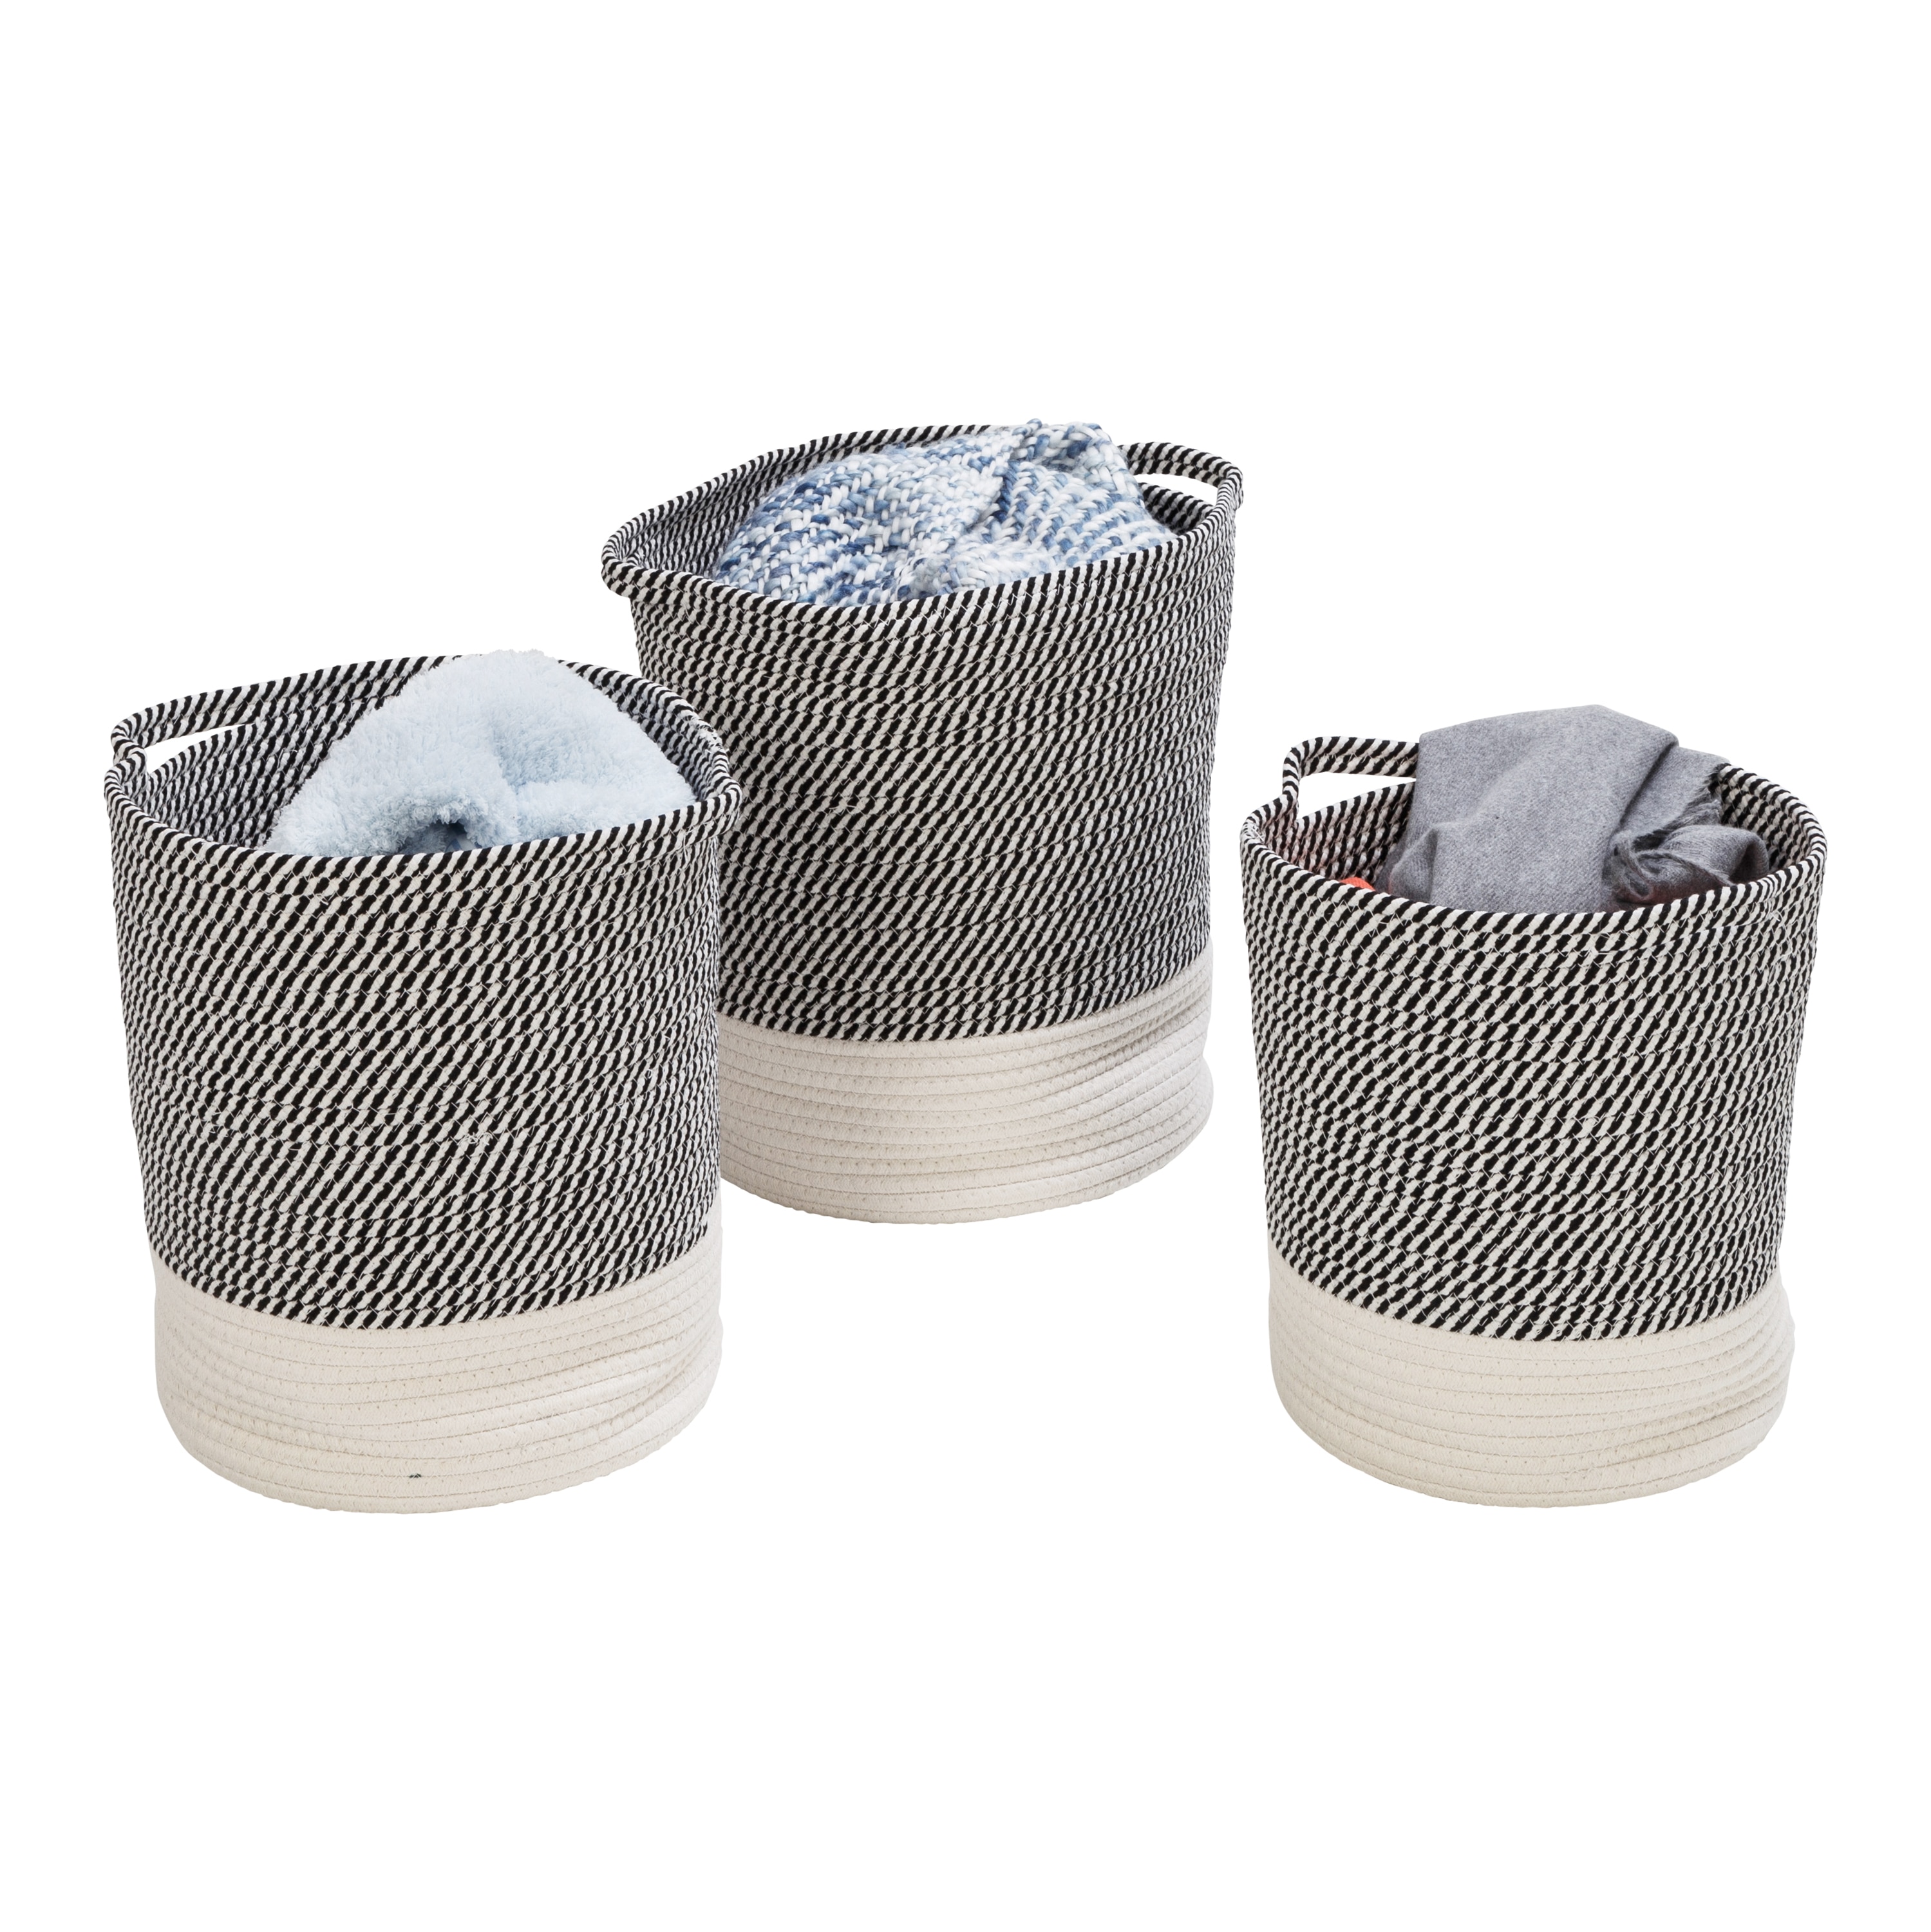 Set of 2 Gray/White Cotton Rope Baskets